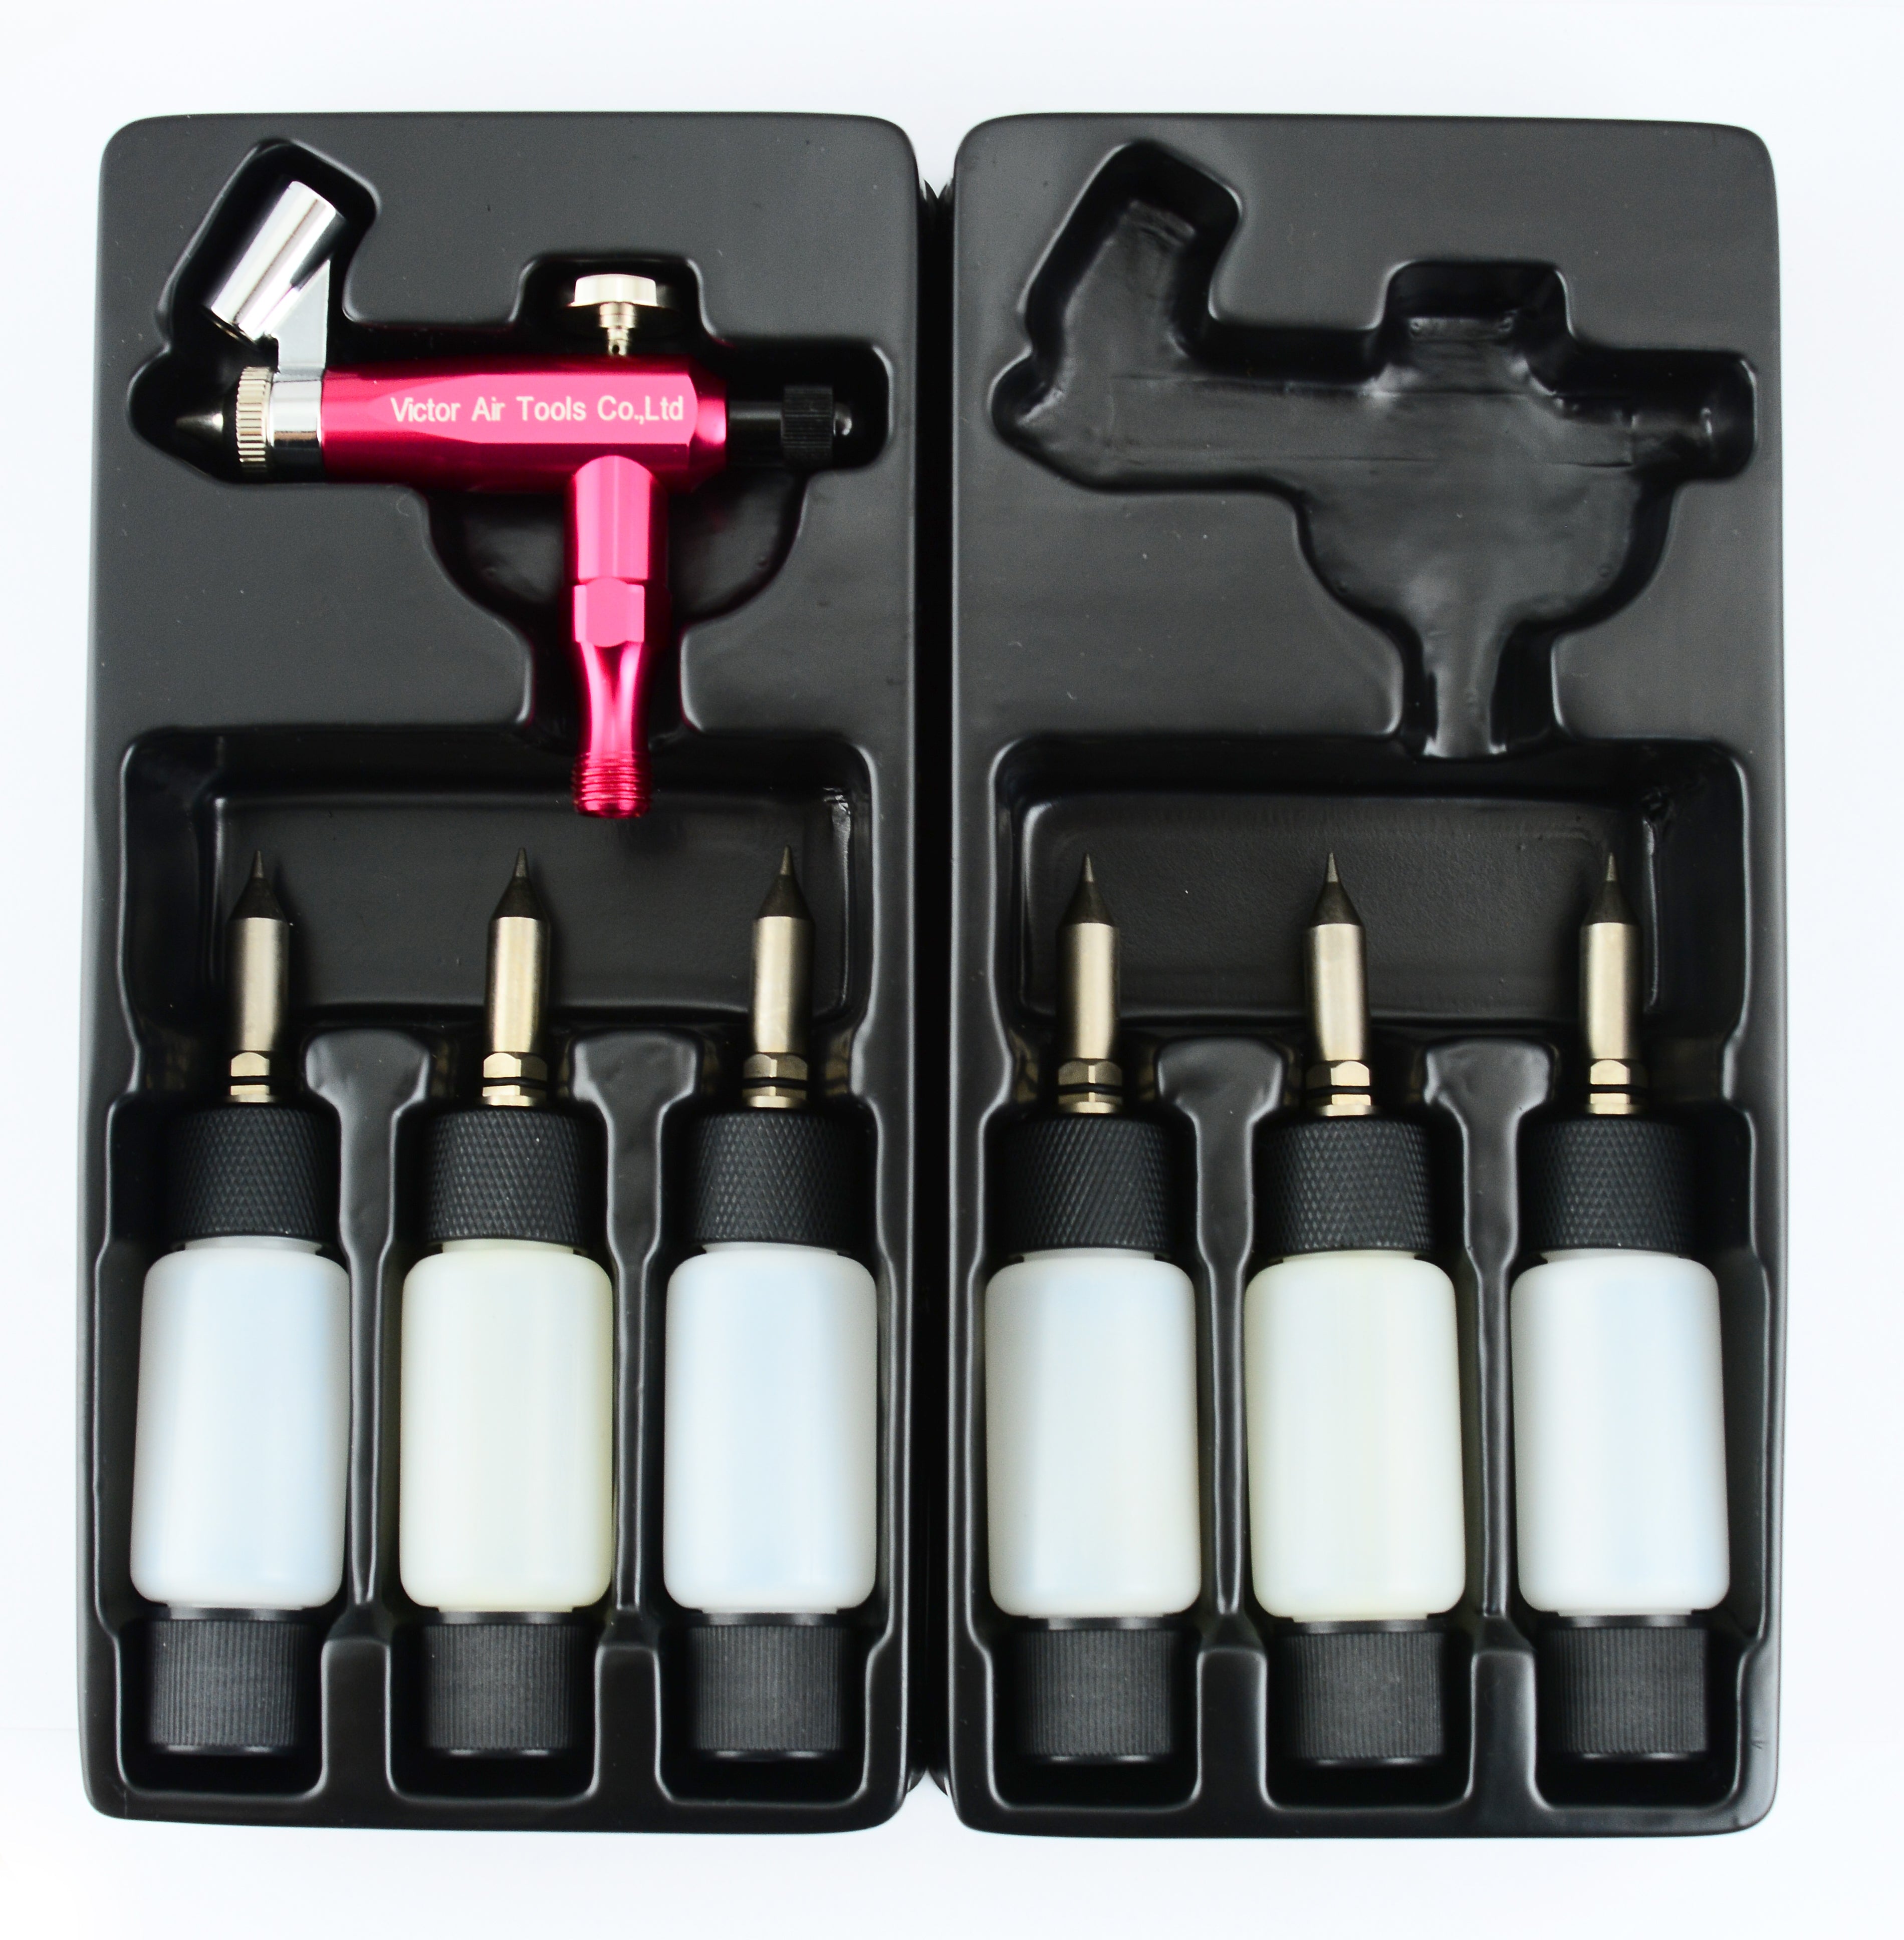 ZeroG- Quick Change Airbrush System 6 in 1 kit (0.7mm) - Includes Shipping